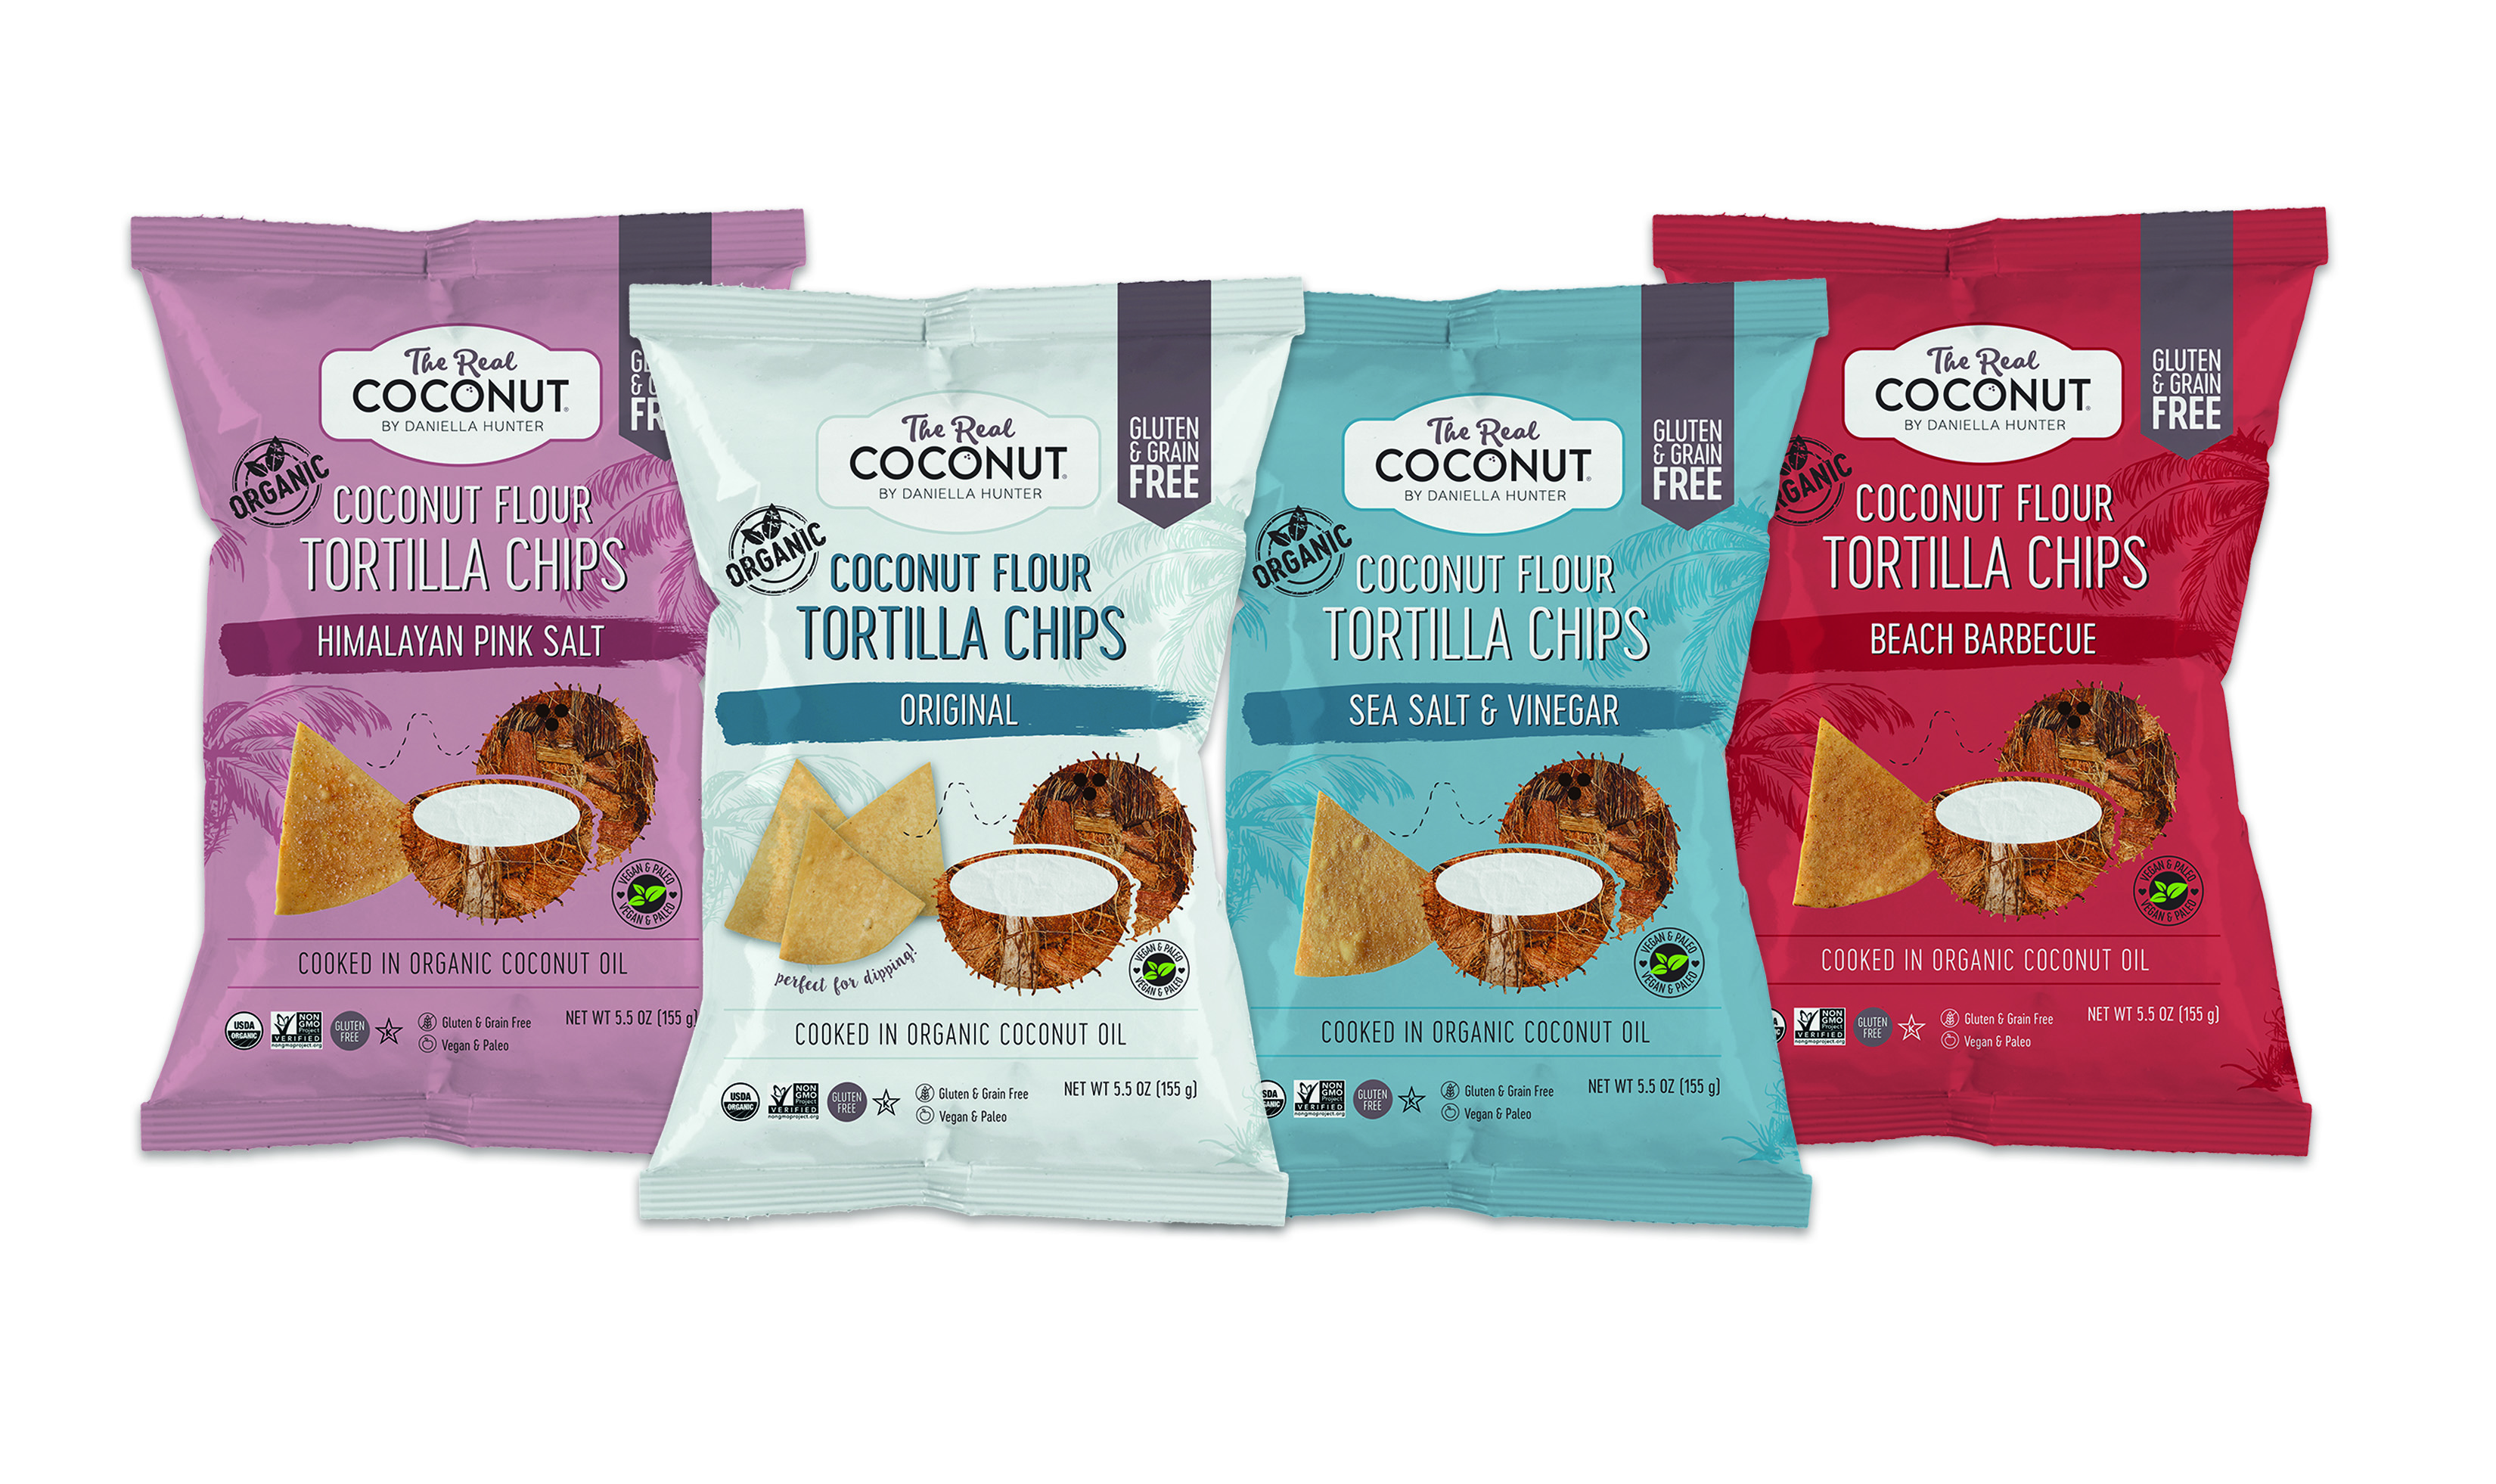 New gluten-free tortilla chips have just launched in the UK!